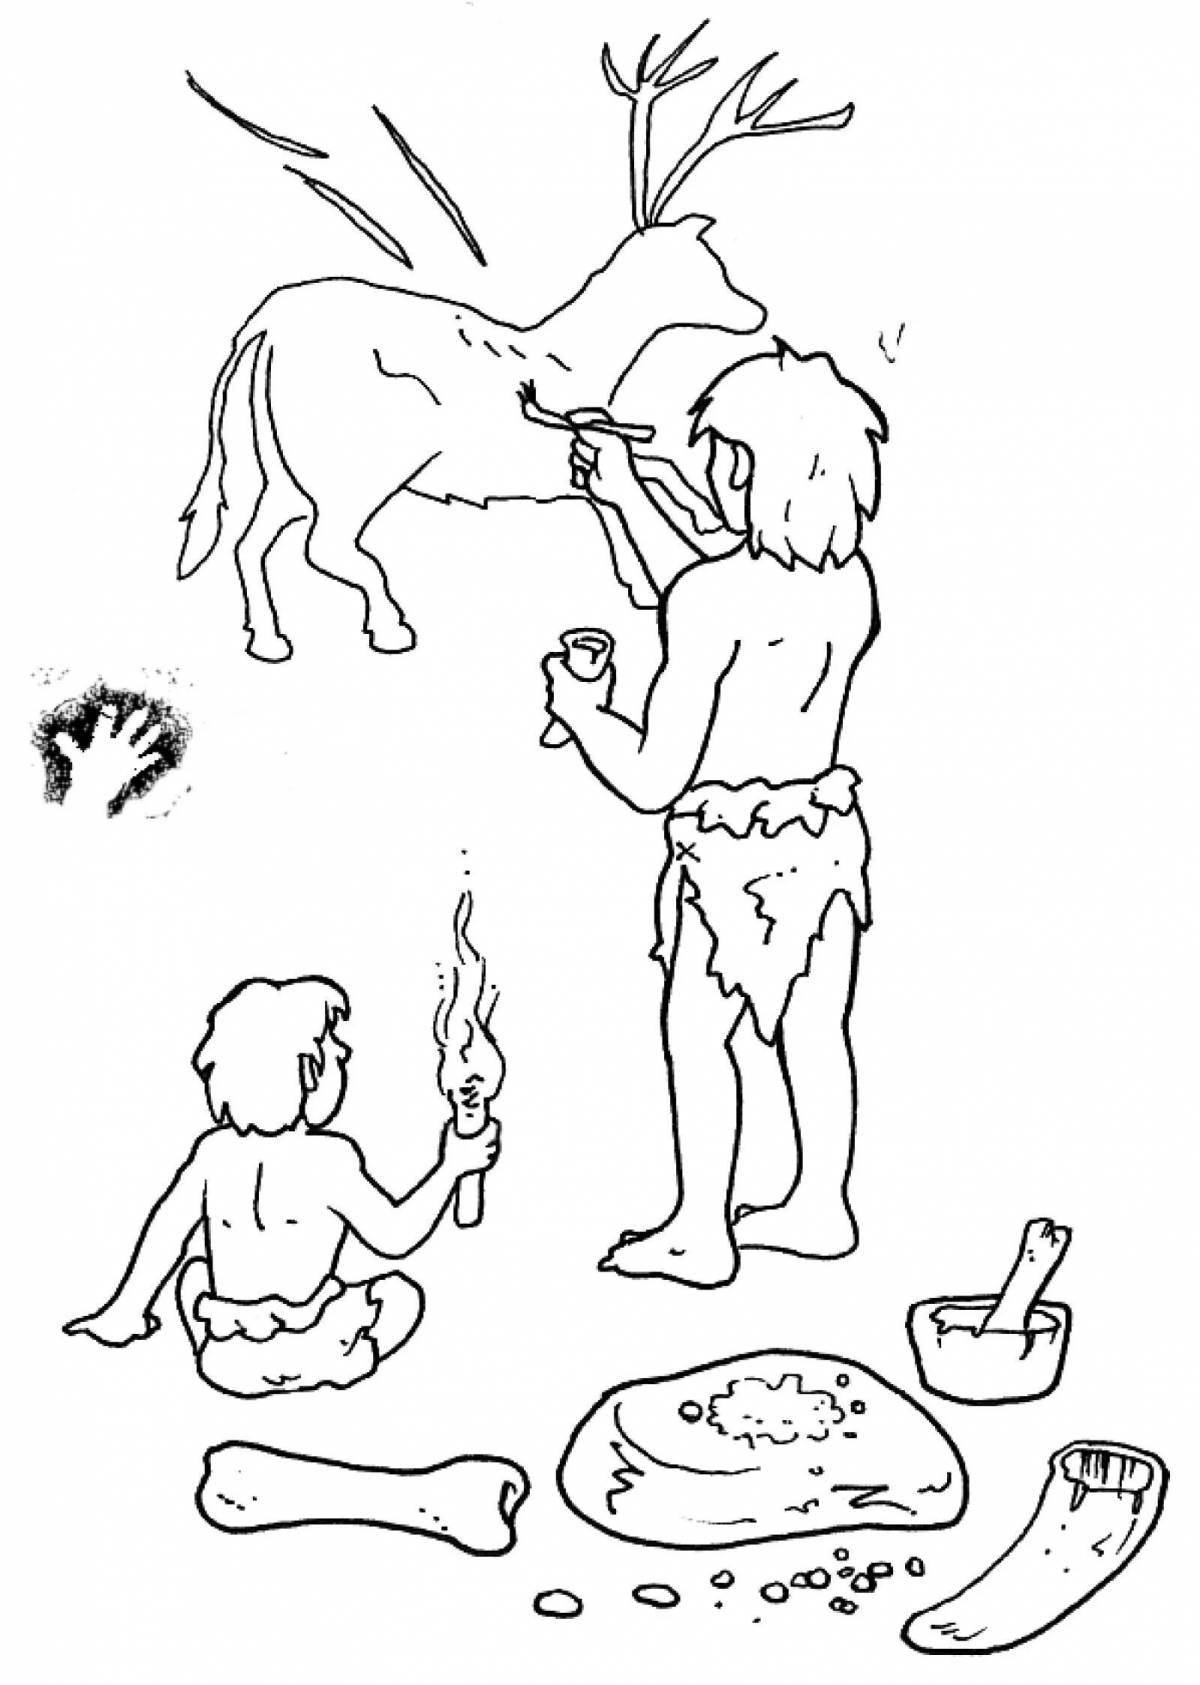 Amazing coloring pages of ancient people